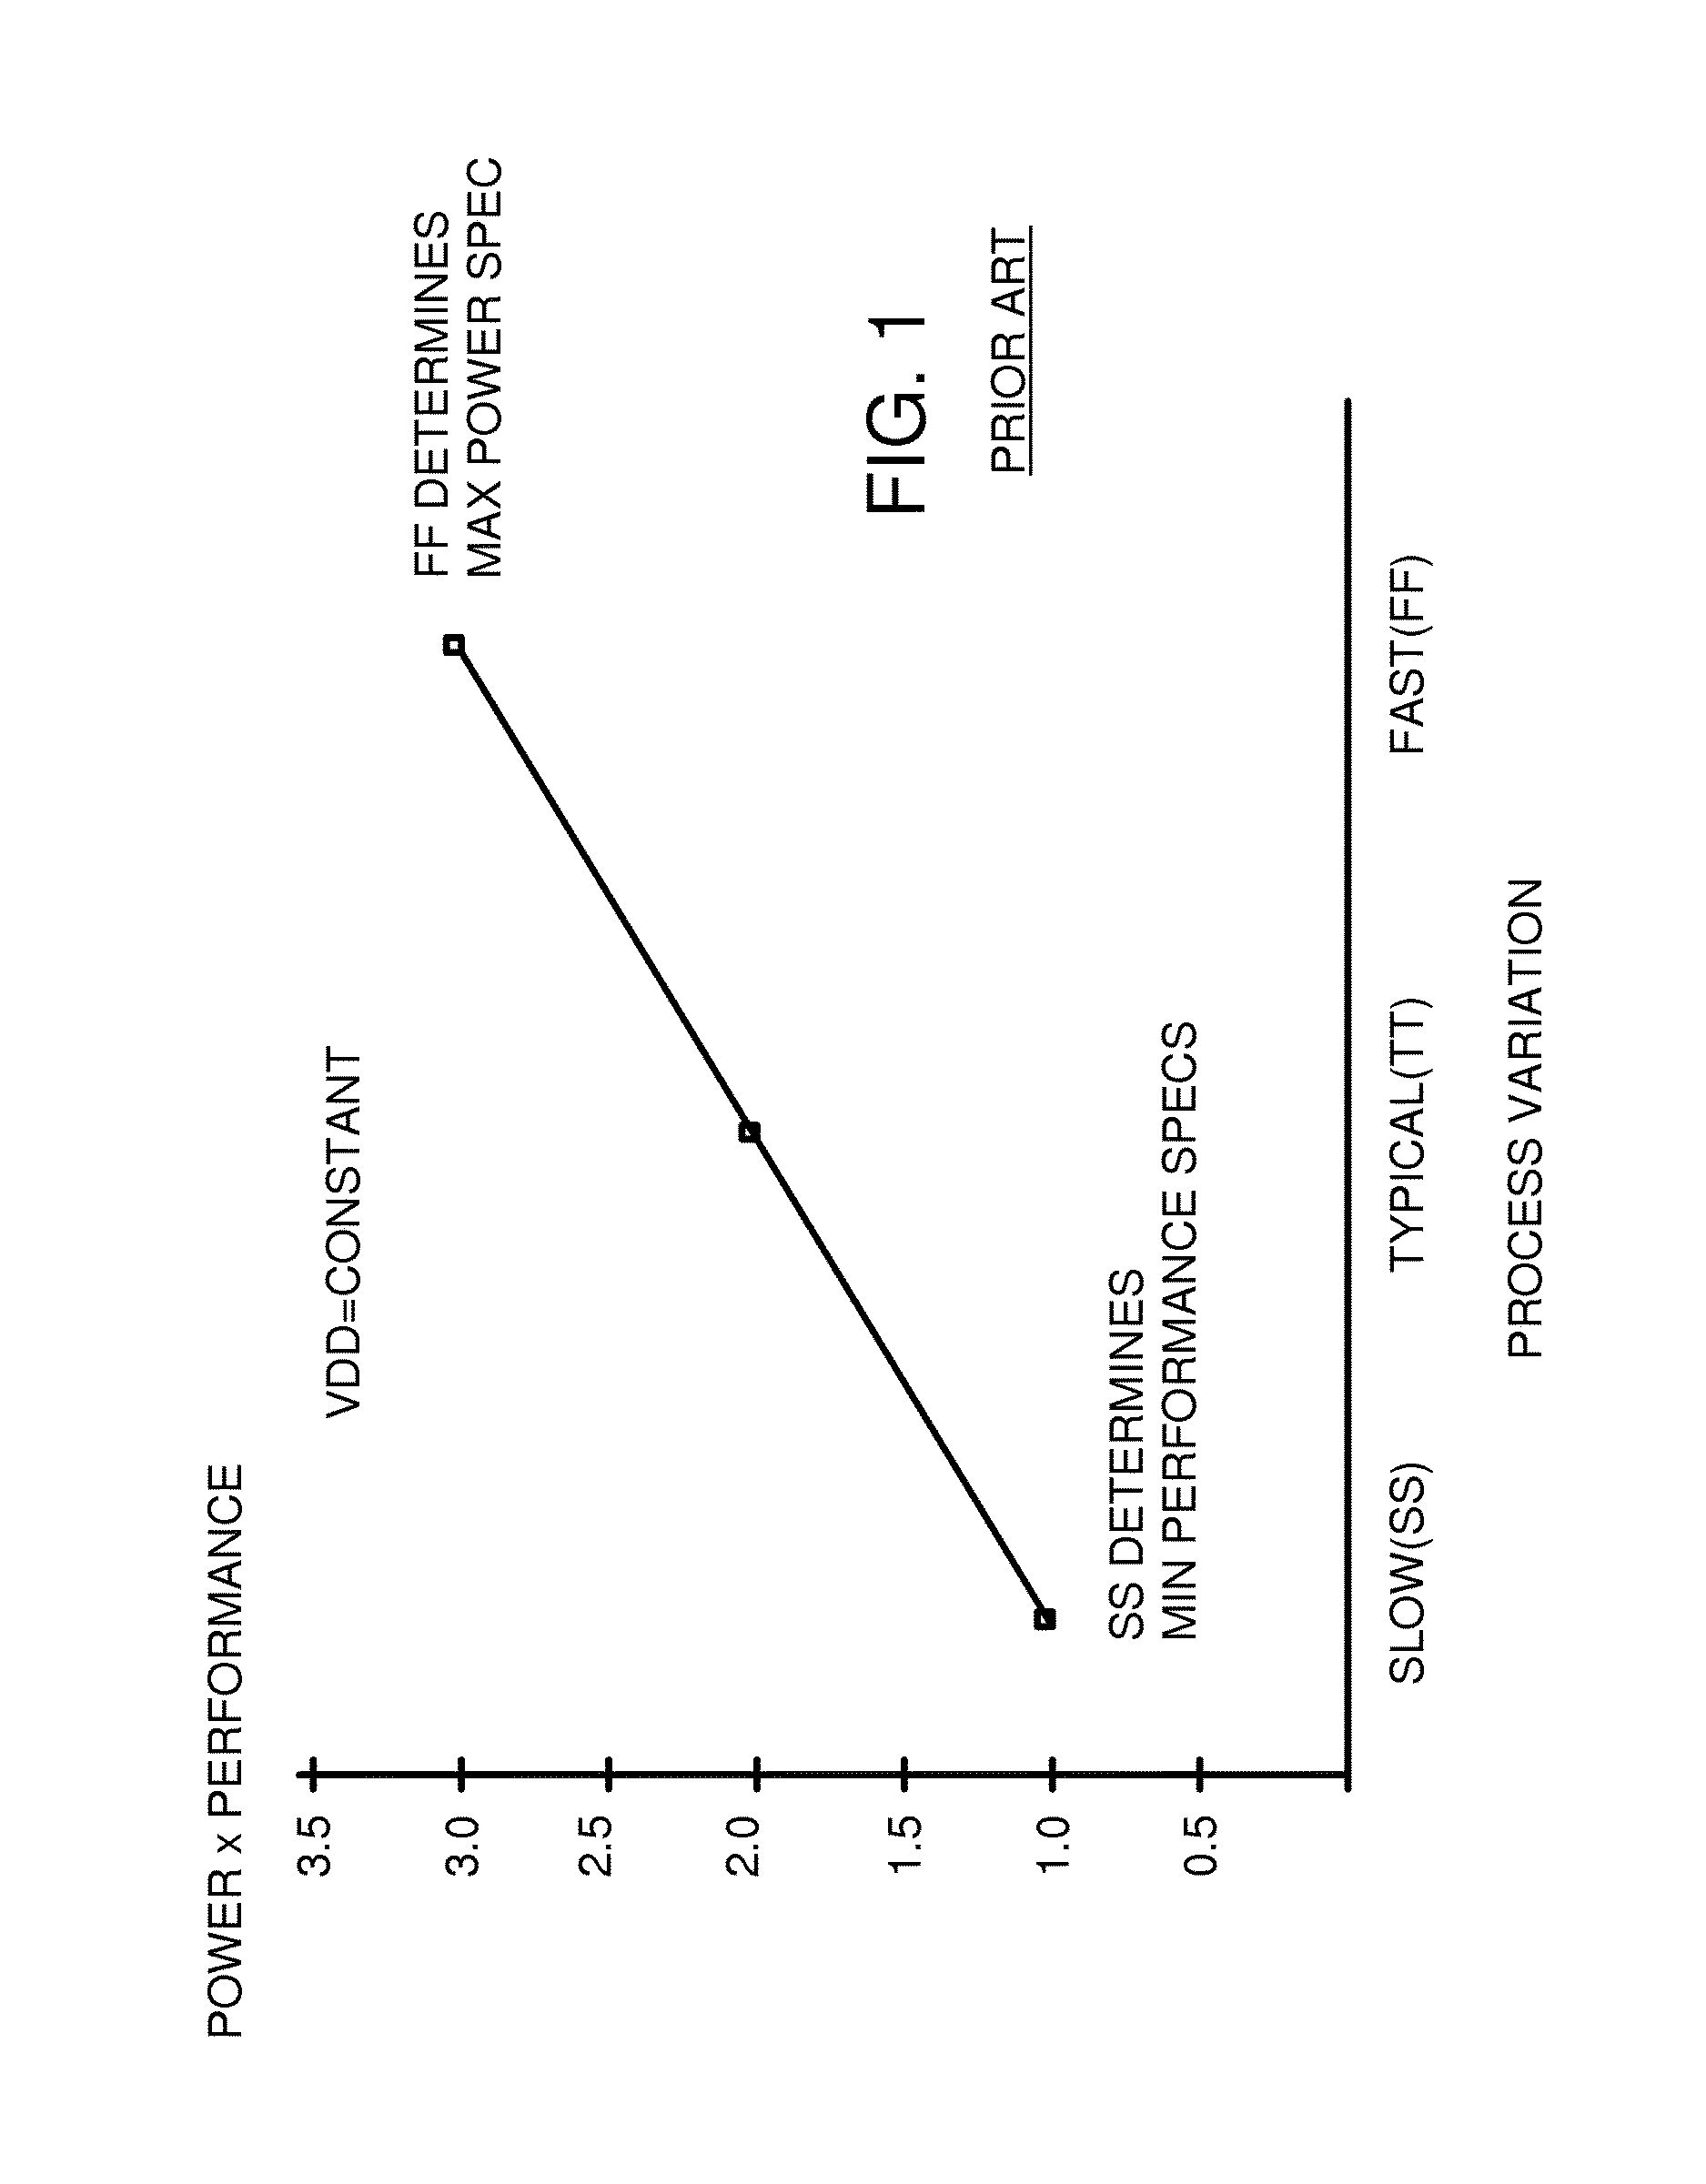 Method and algorithm for functional critical paths selection and critical path sensors and controller insertion